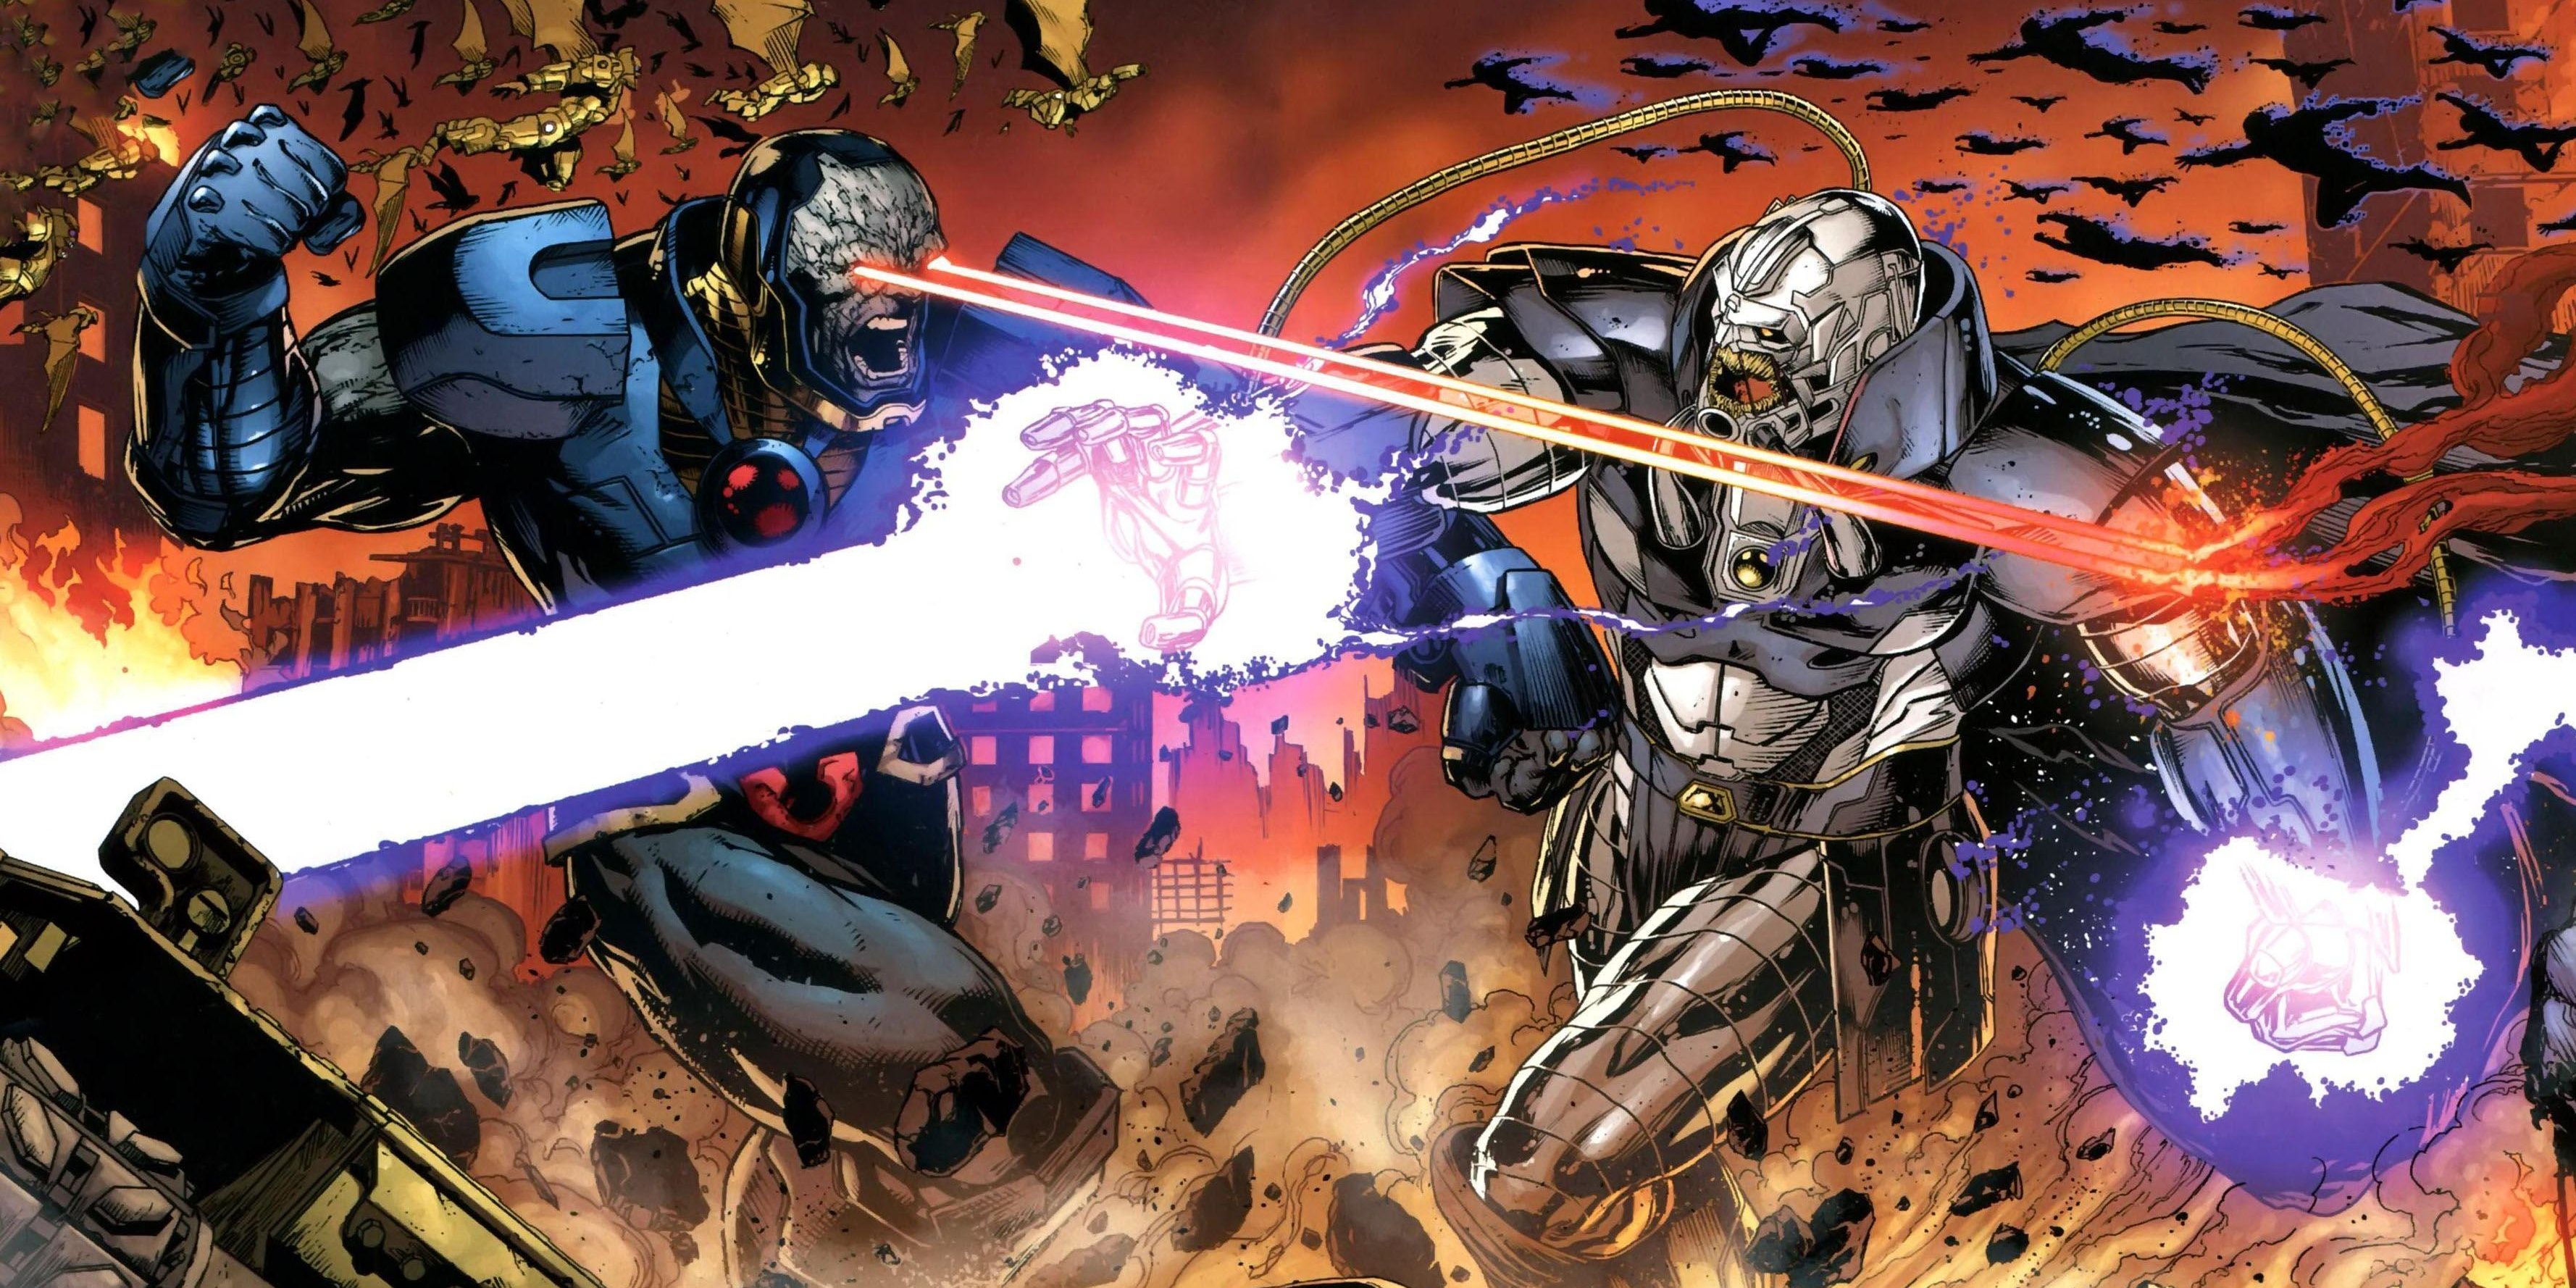 Justice League fights with Darkseid in New 52